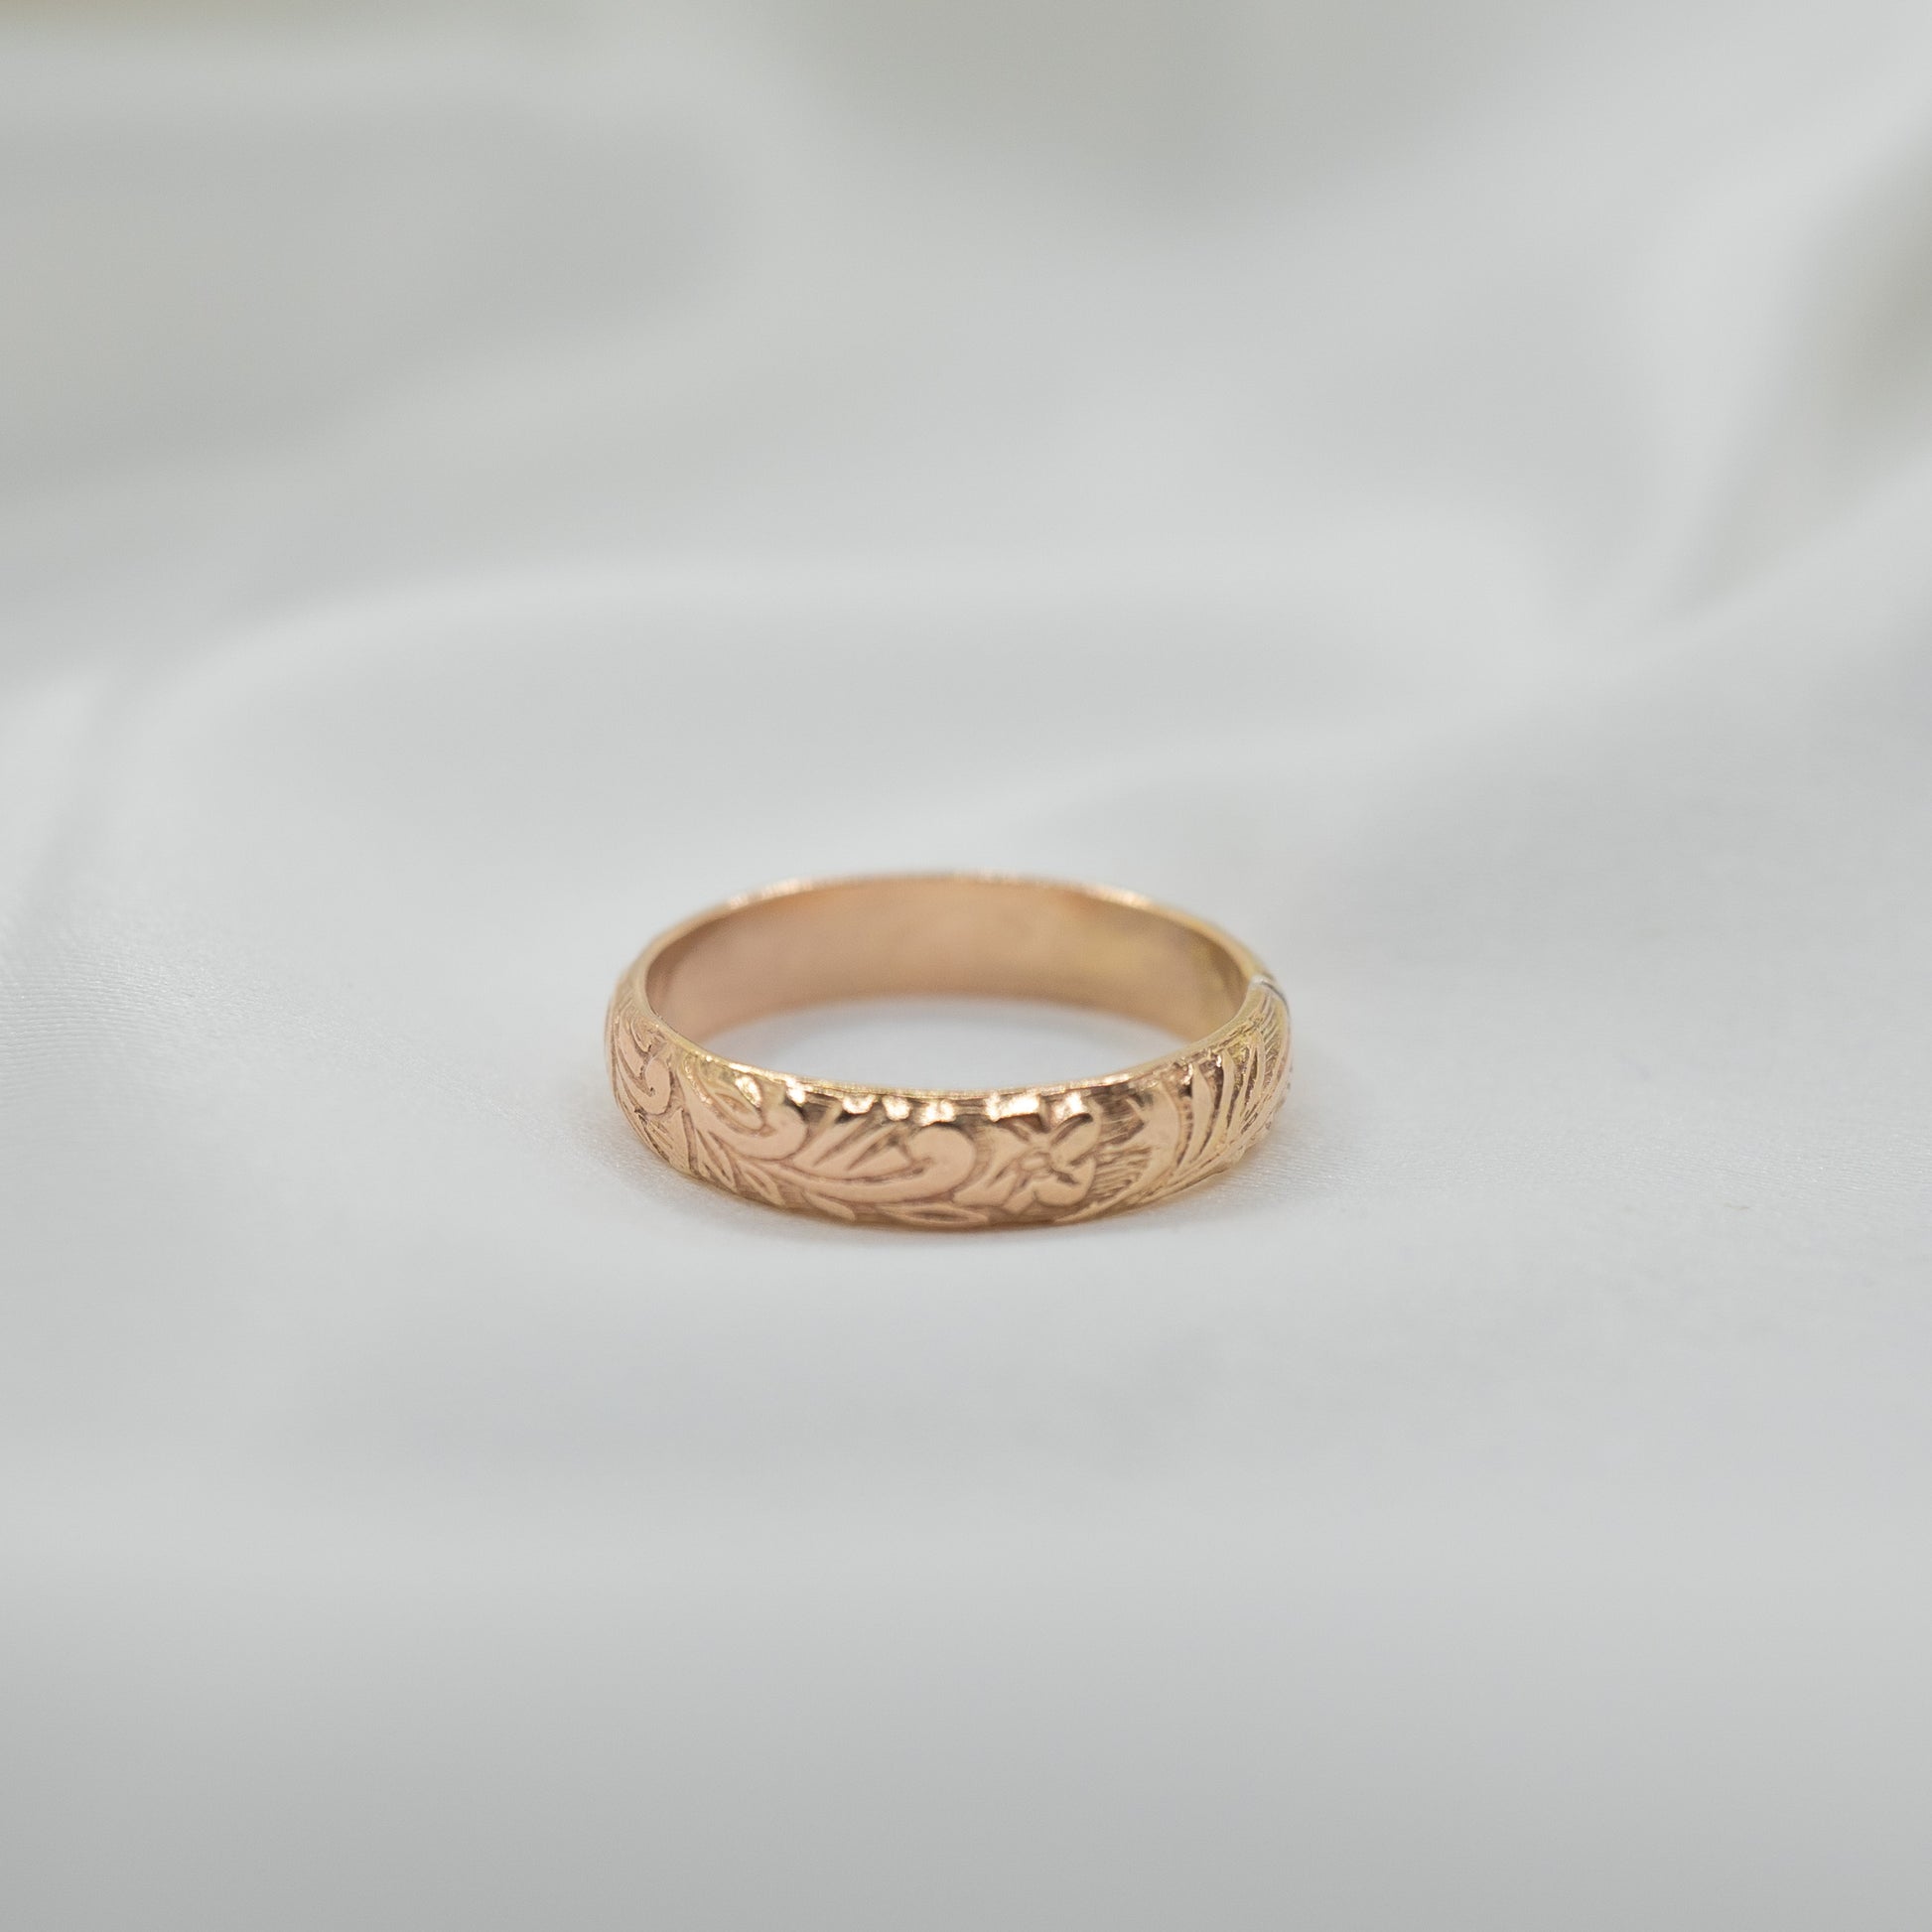 Gold Filled Vintage Pattern Ring - shot on white - top down view